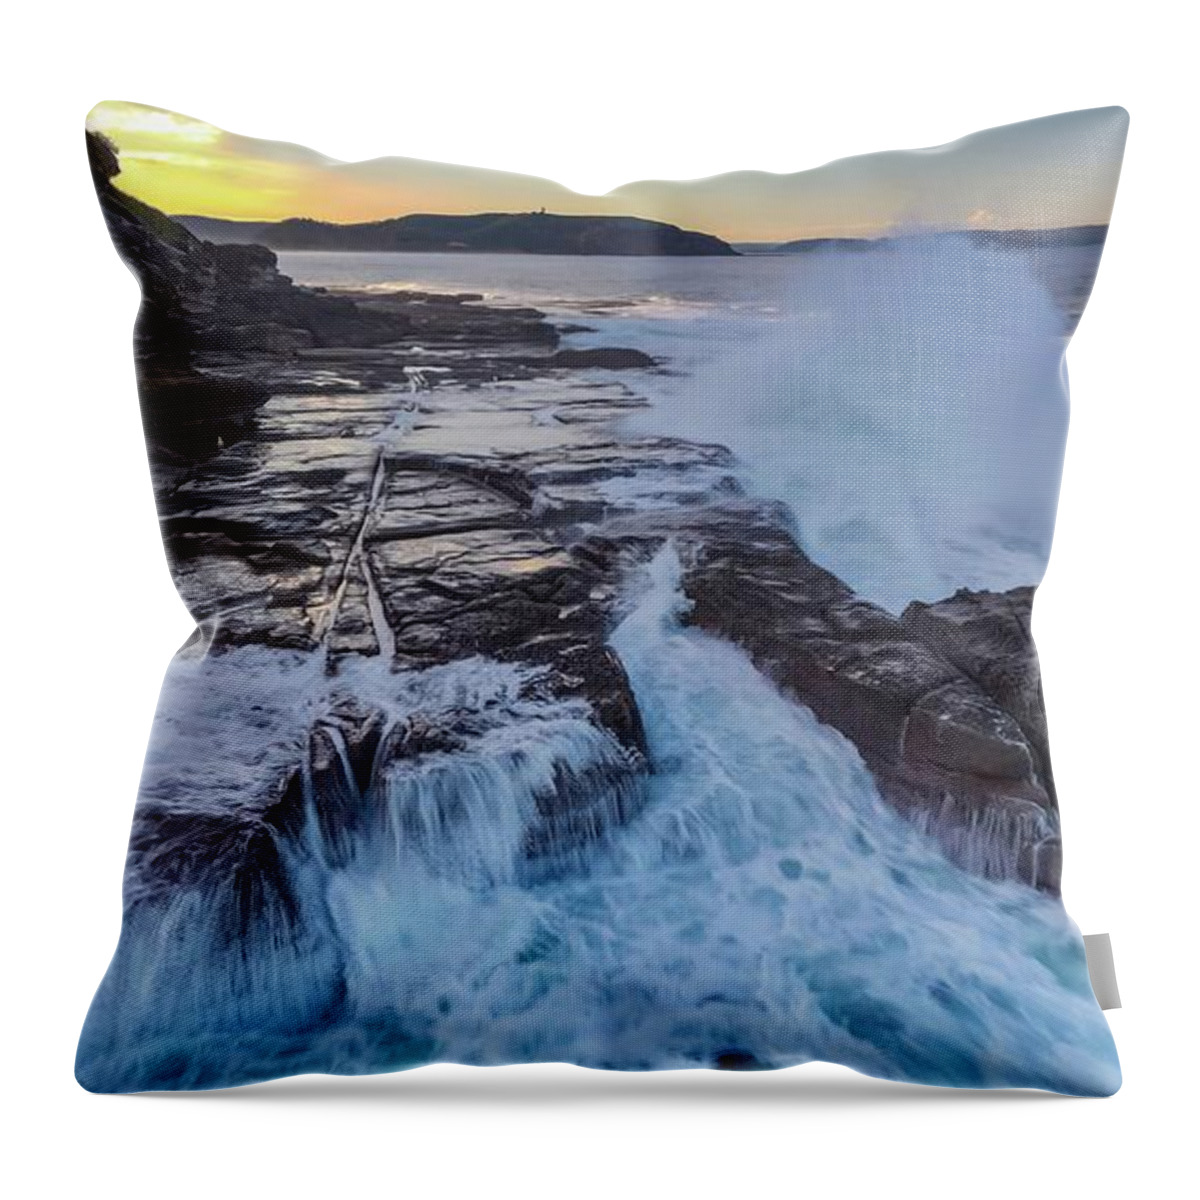 Beach; Sea; Blue; Beautiful; Nature Background; Seascape; Water; Landscape; Rocks; Cliffs; Rock Pool; Tourism; Travel; Summer; Holidays; Sea; Surf; Palm Beach Throw Pillow featuring the photograph Sunset Near Palm Beach No 5 by Andre Petrov